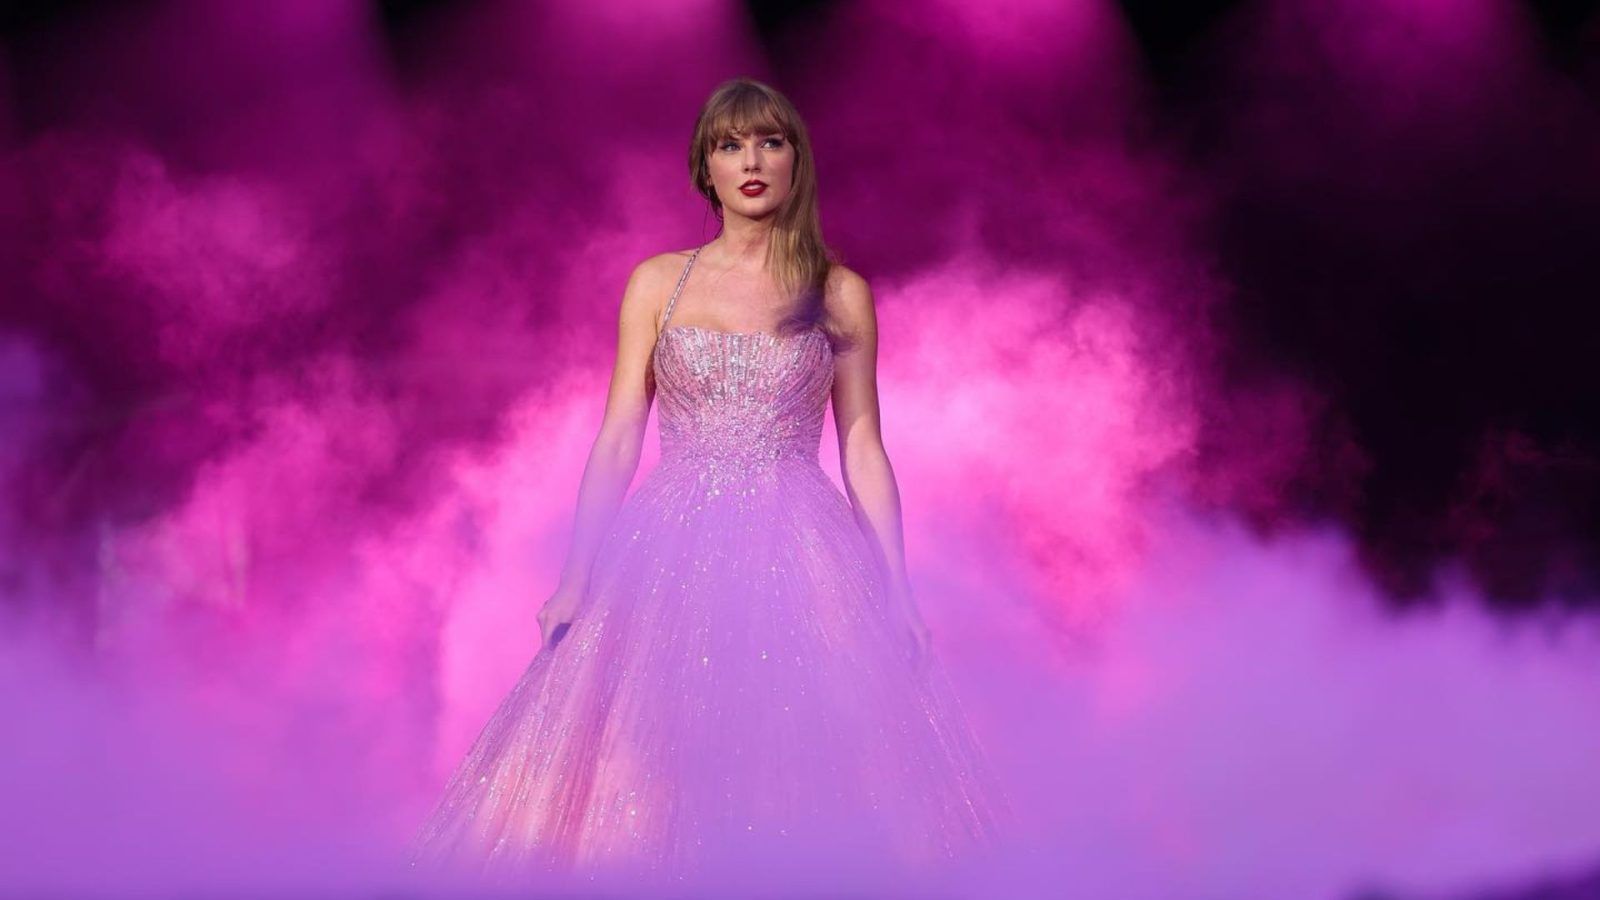 15 best and moststreamed songs by Taylor Swift on Spotify